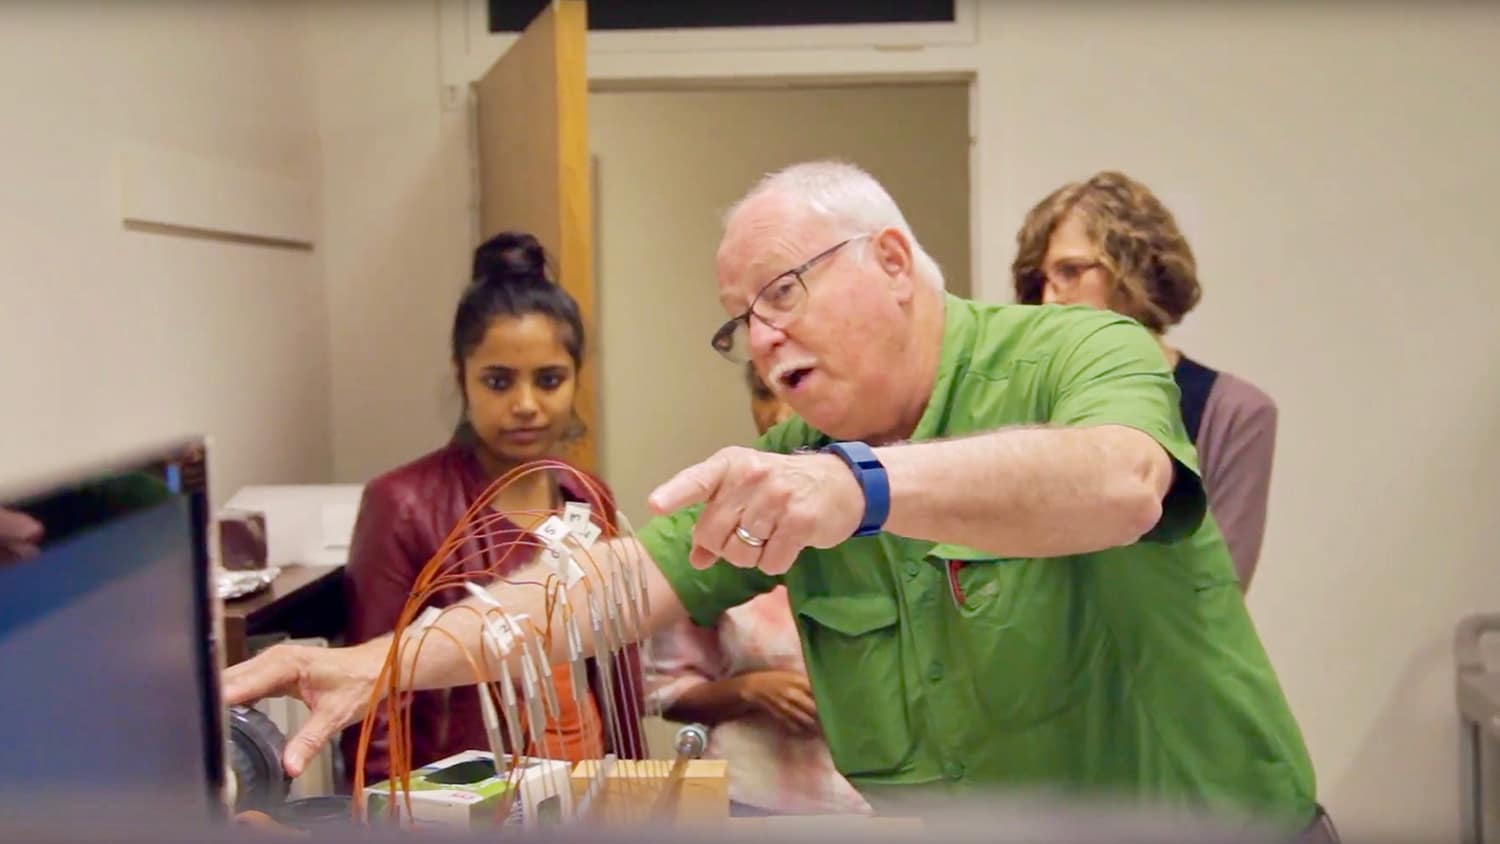 Tom Banks demonstrates a mathematical experiment to students in his lab